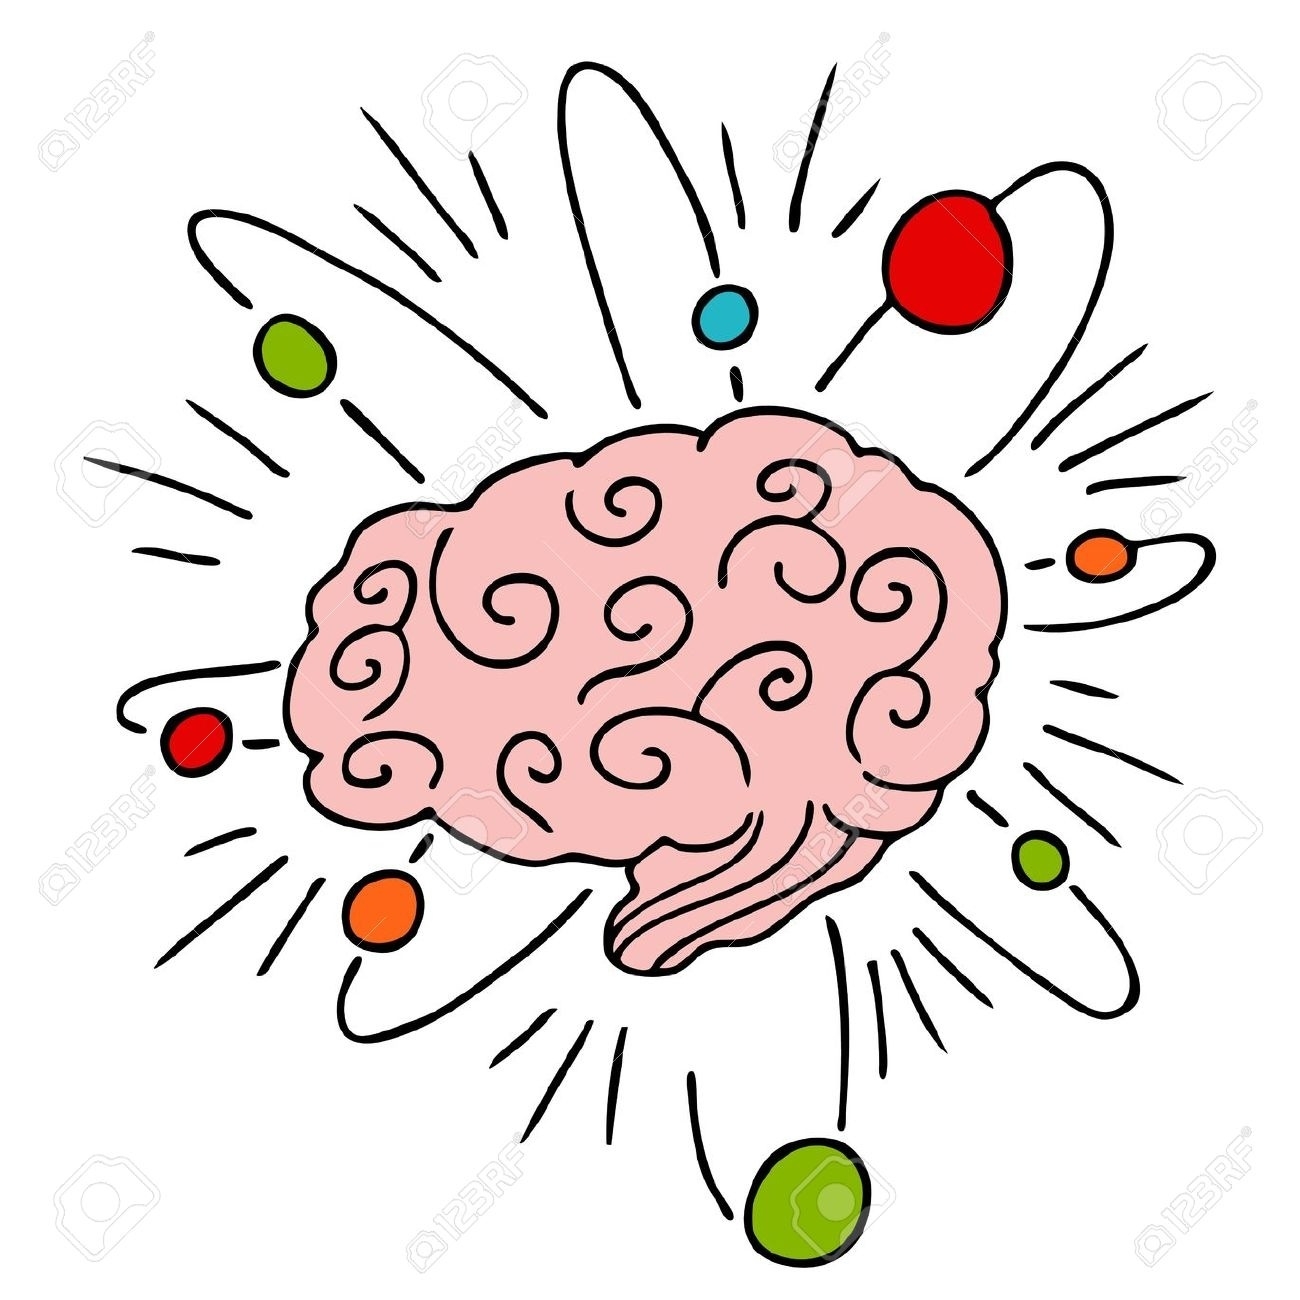 Thinking pencil and in. Clipart brain creative